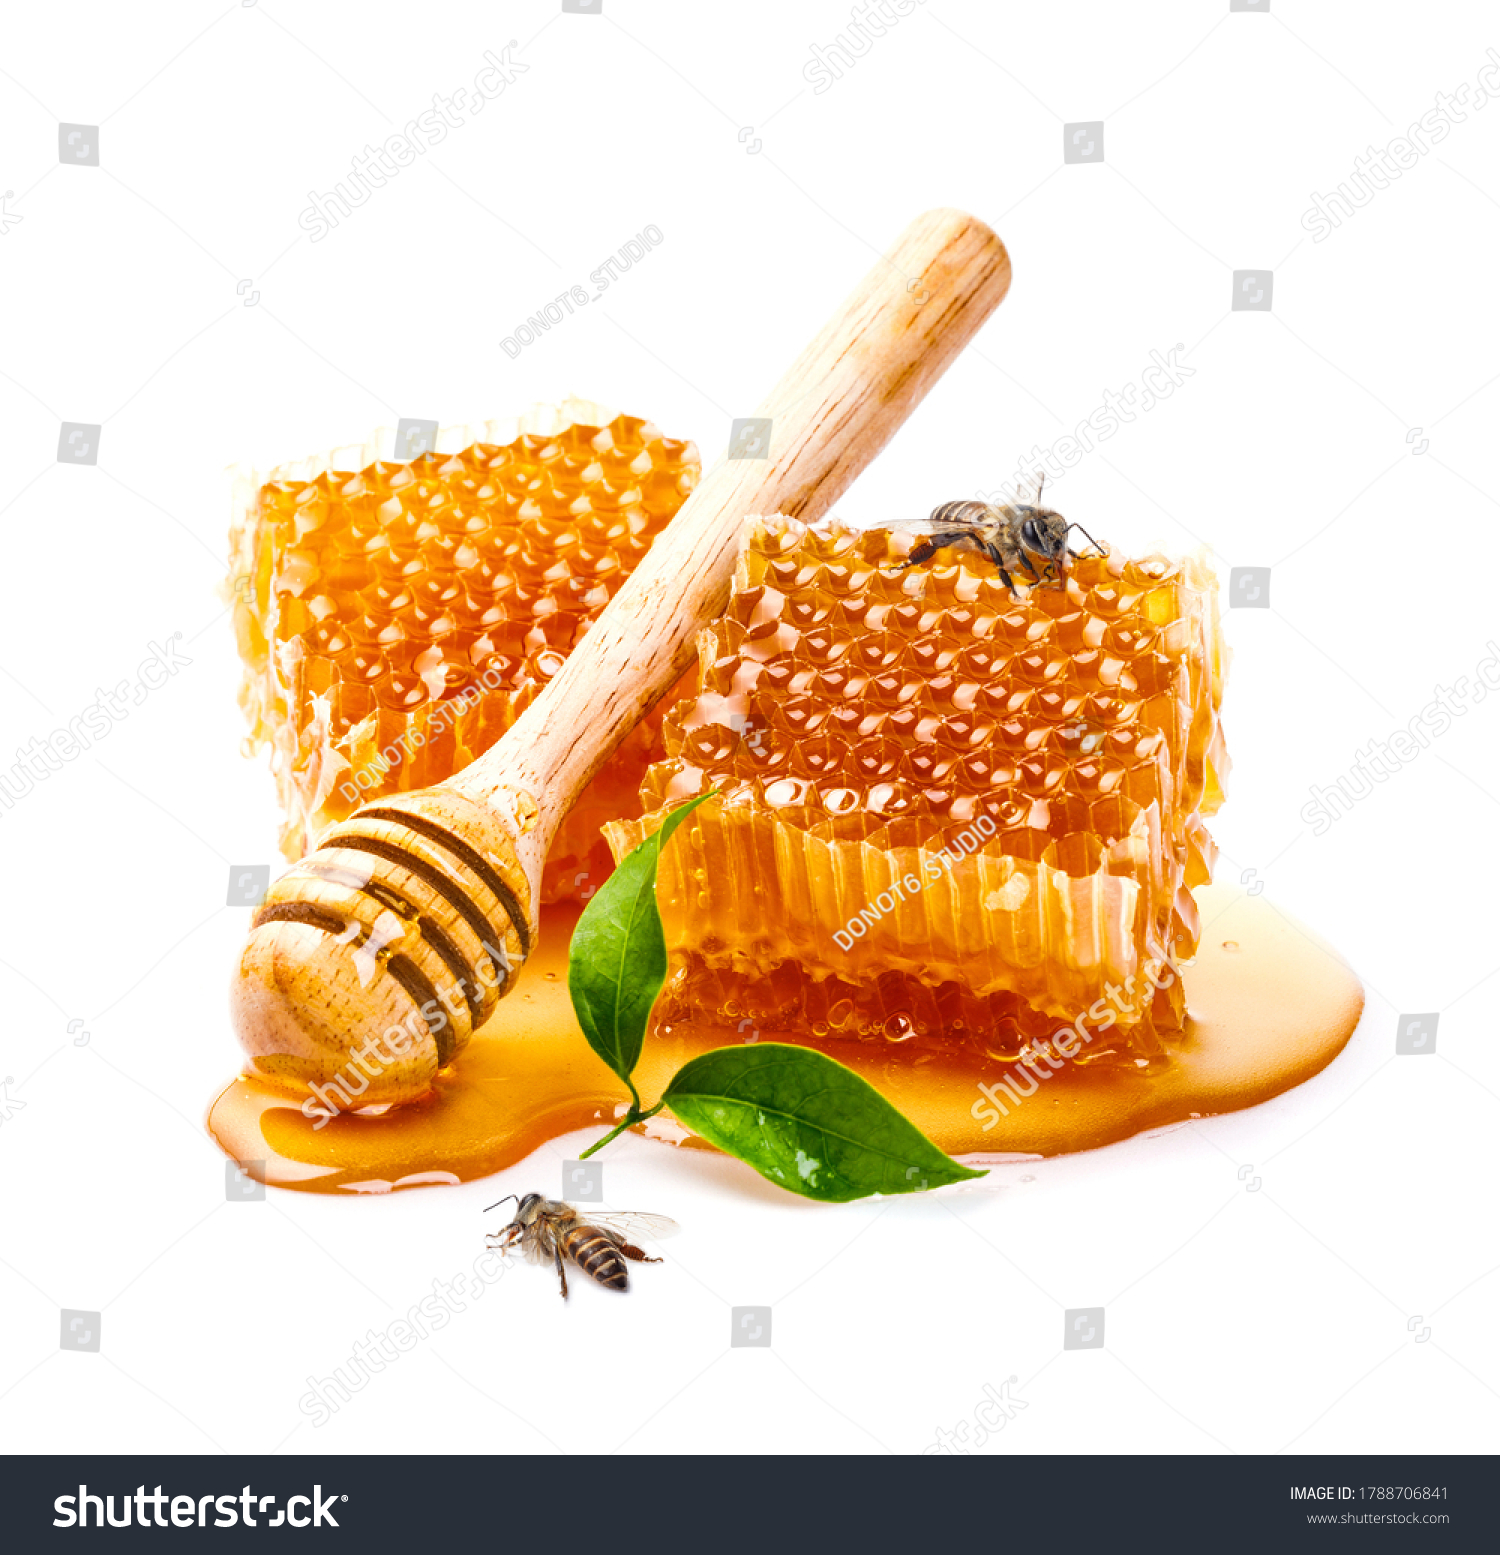 Honeycomb with bee and honey dipper isolate on white banner background, bee products by organic natural ingredients concept #1788706841